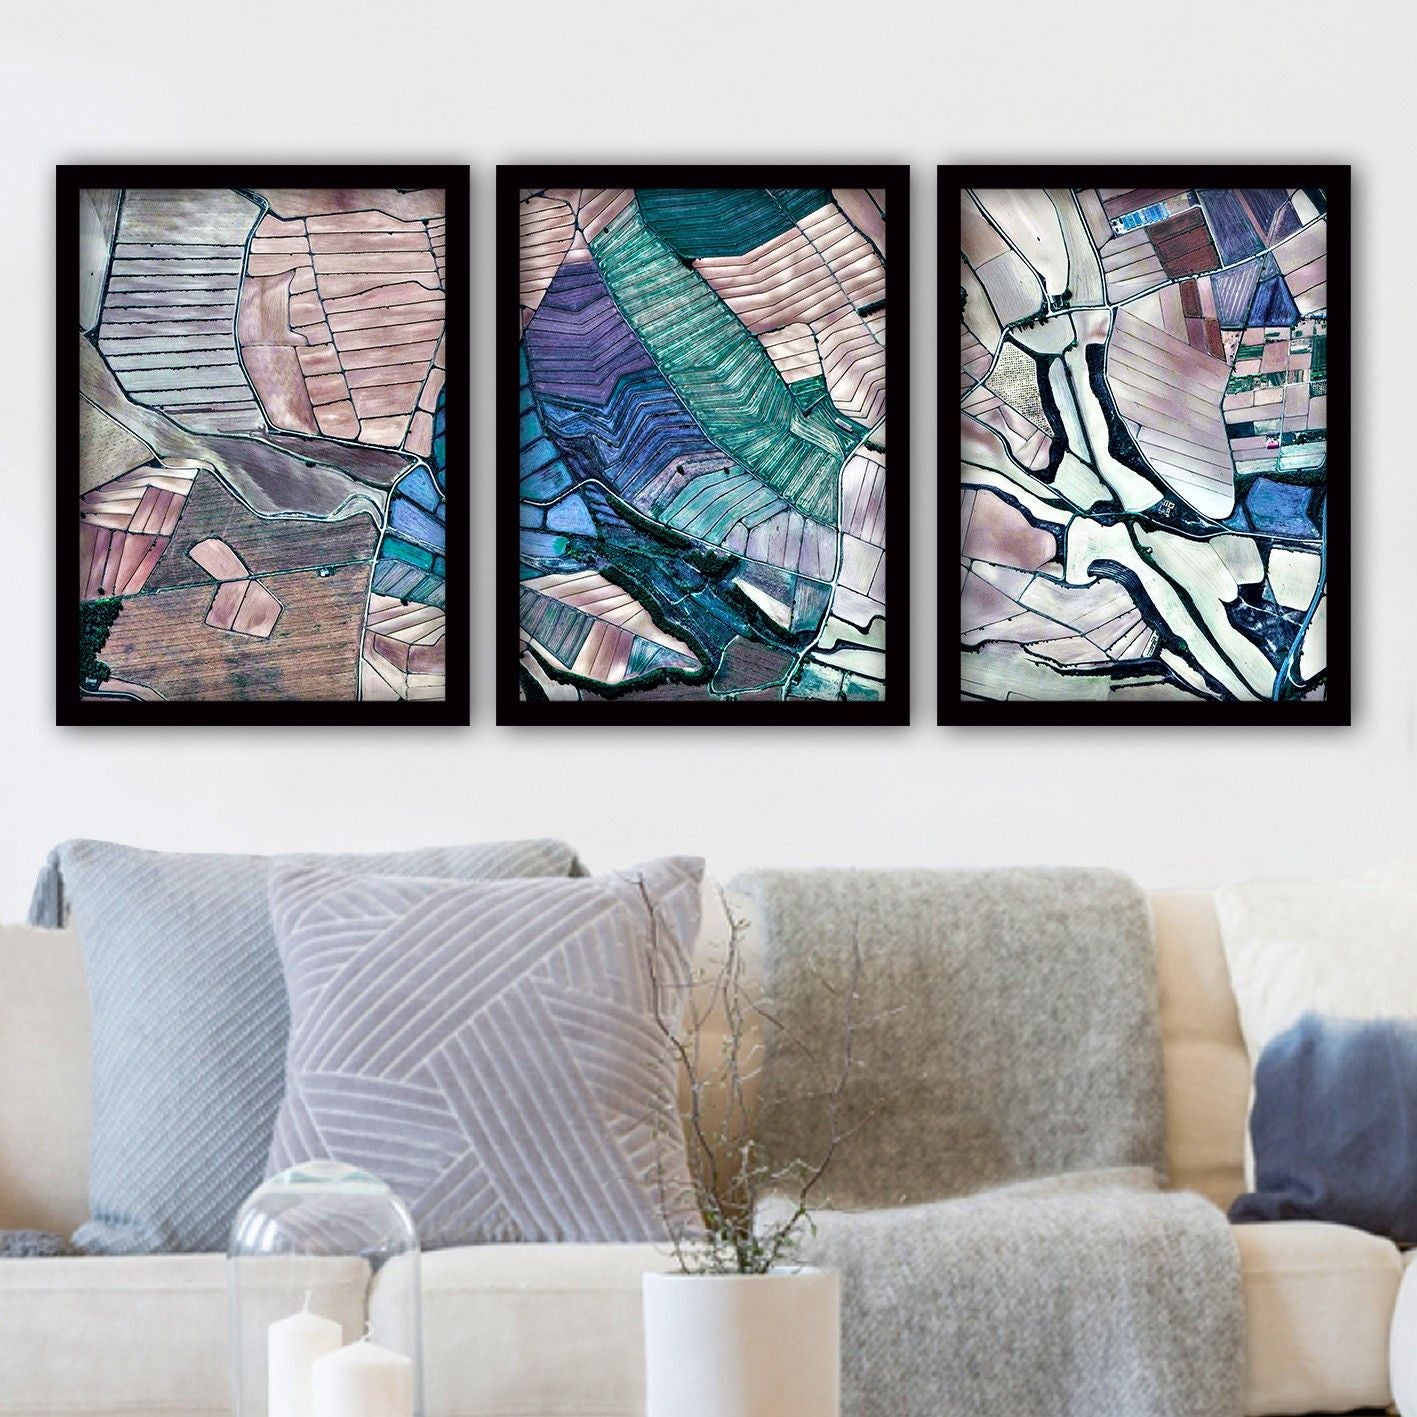 3SC20 - Decorative Framed Painting (3 Pieces)